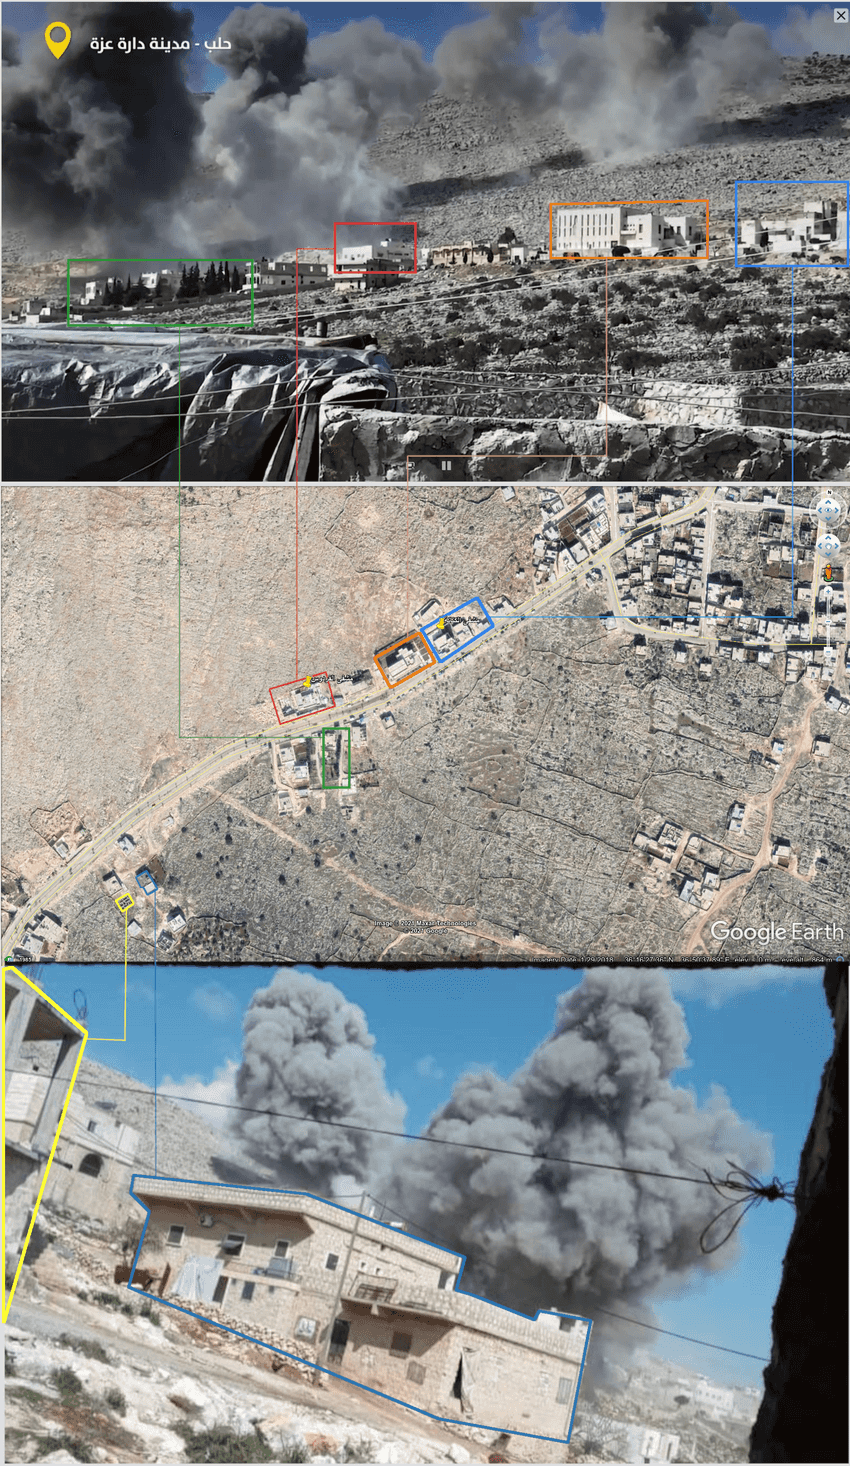 Geolocation of images showing the bombing of Al Kinanah and Al Ferdous Hospitals